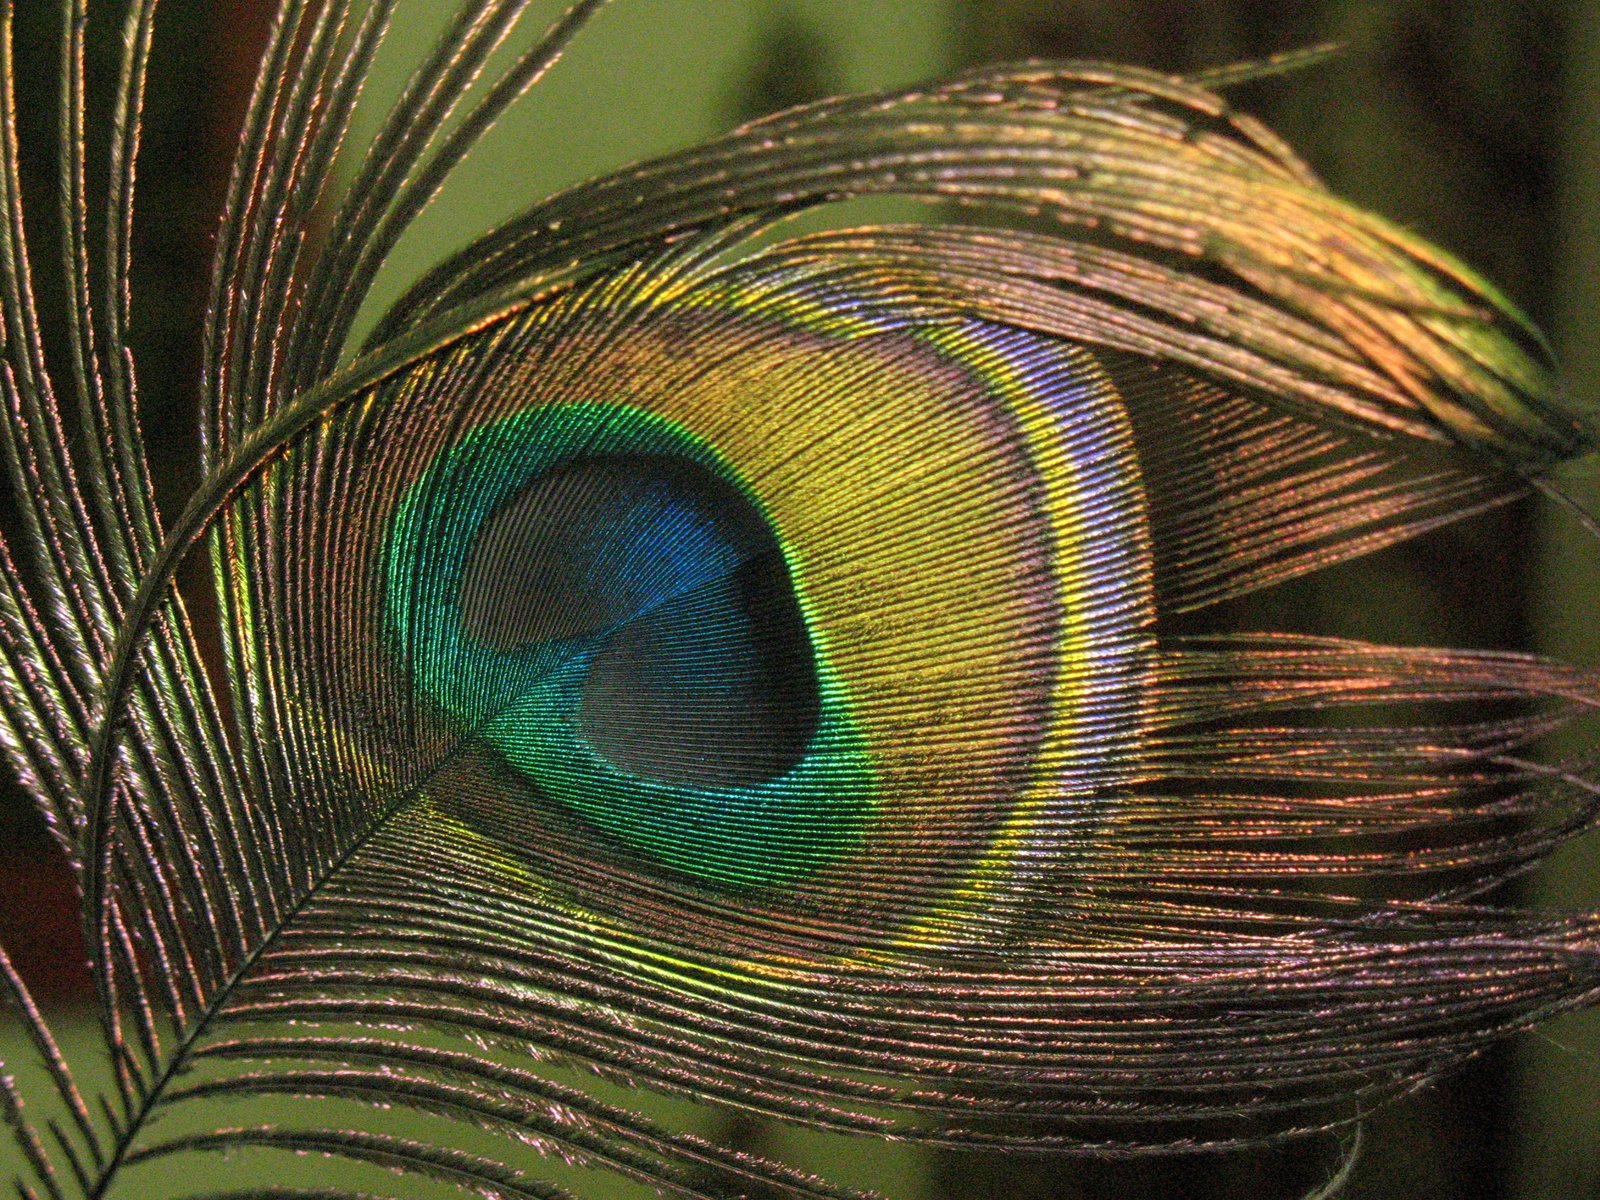  Wallpaper Wallpapers Peacock Feather Backgrounds Peacock Wallpapers 1600x1200